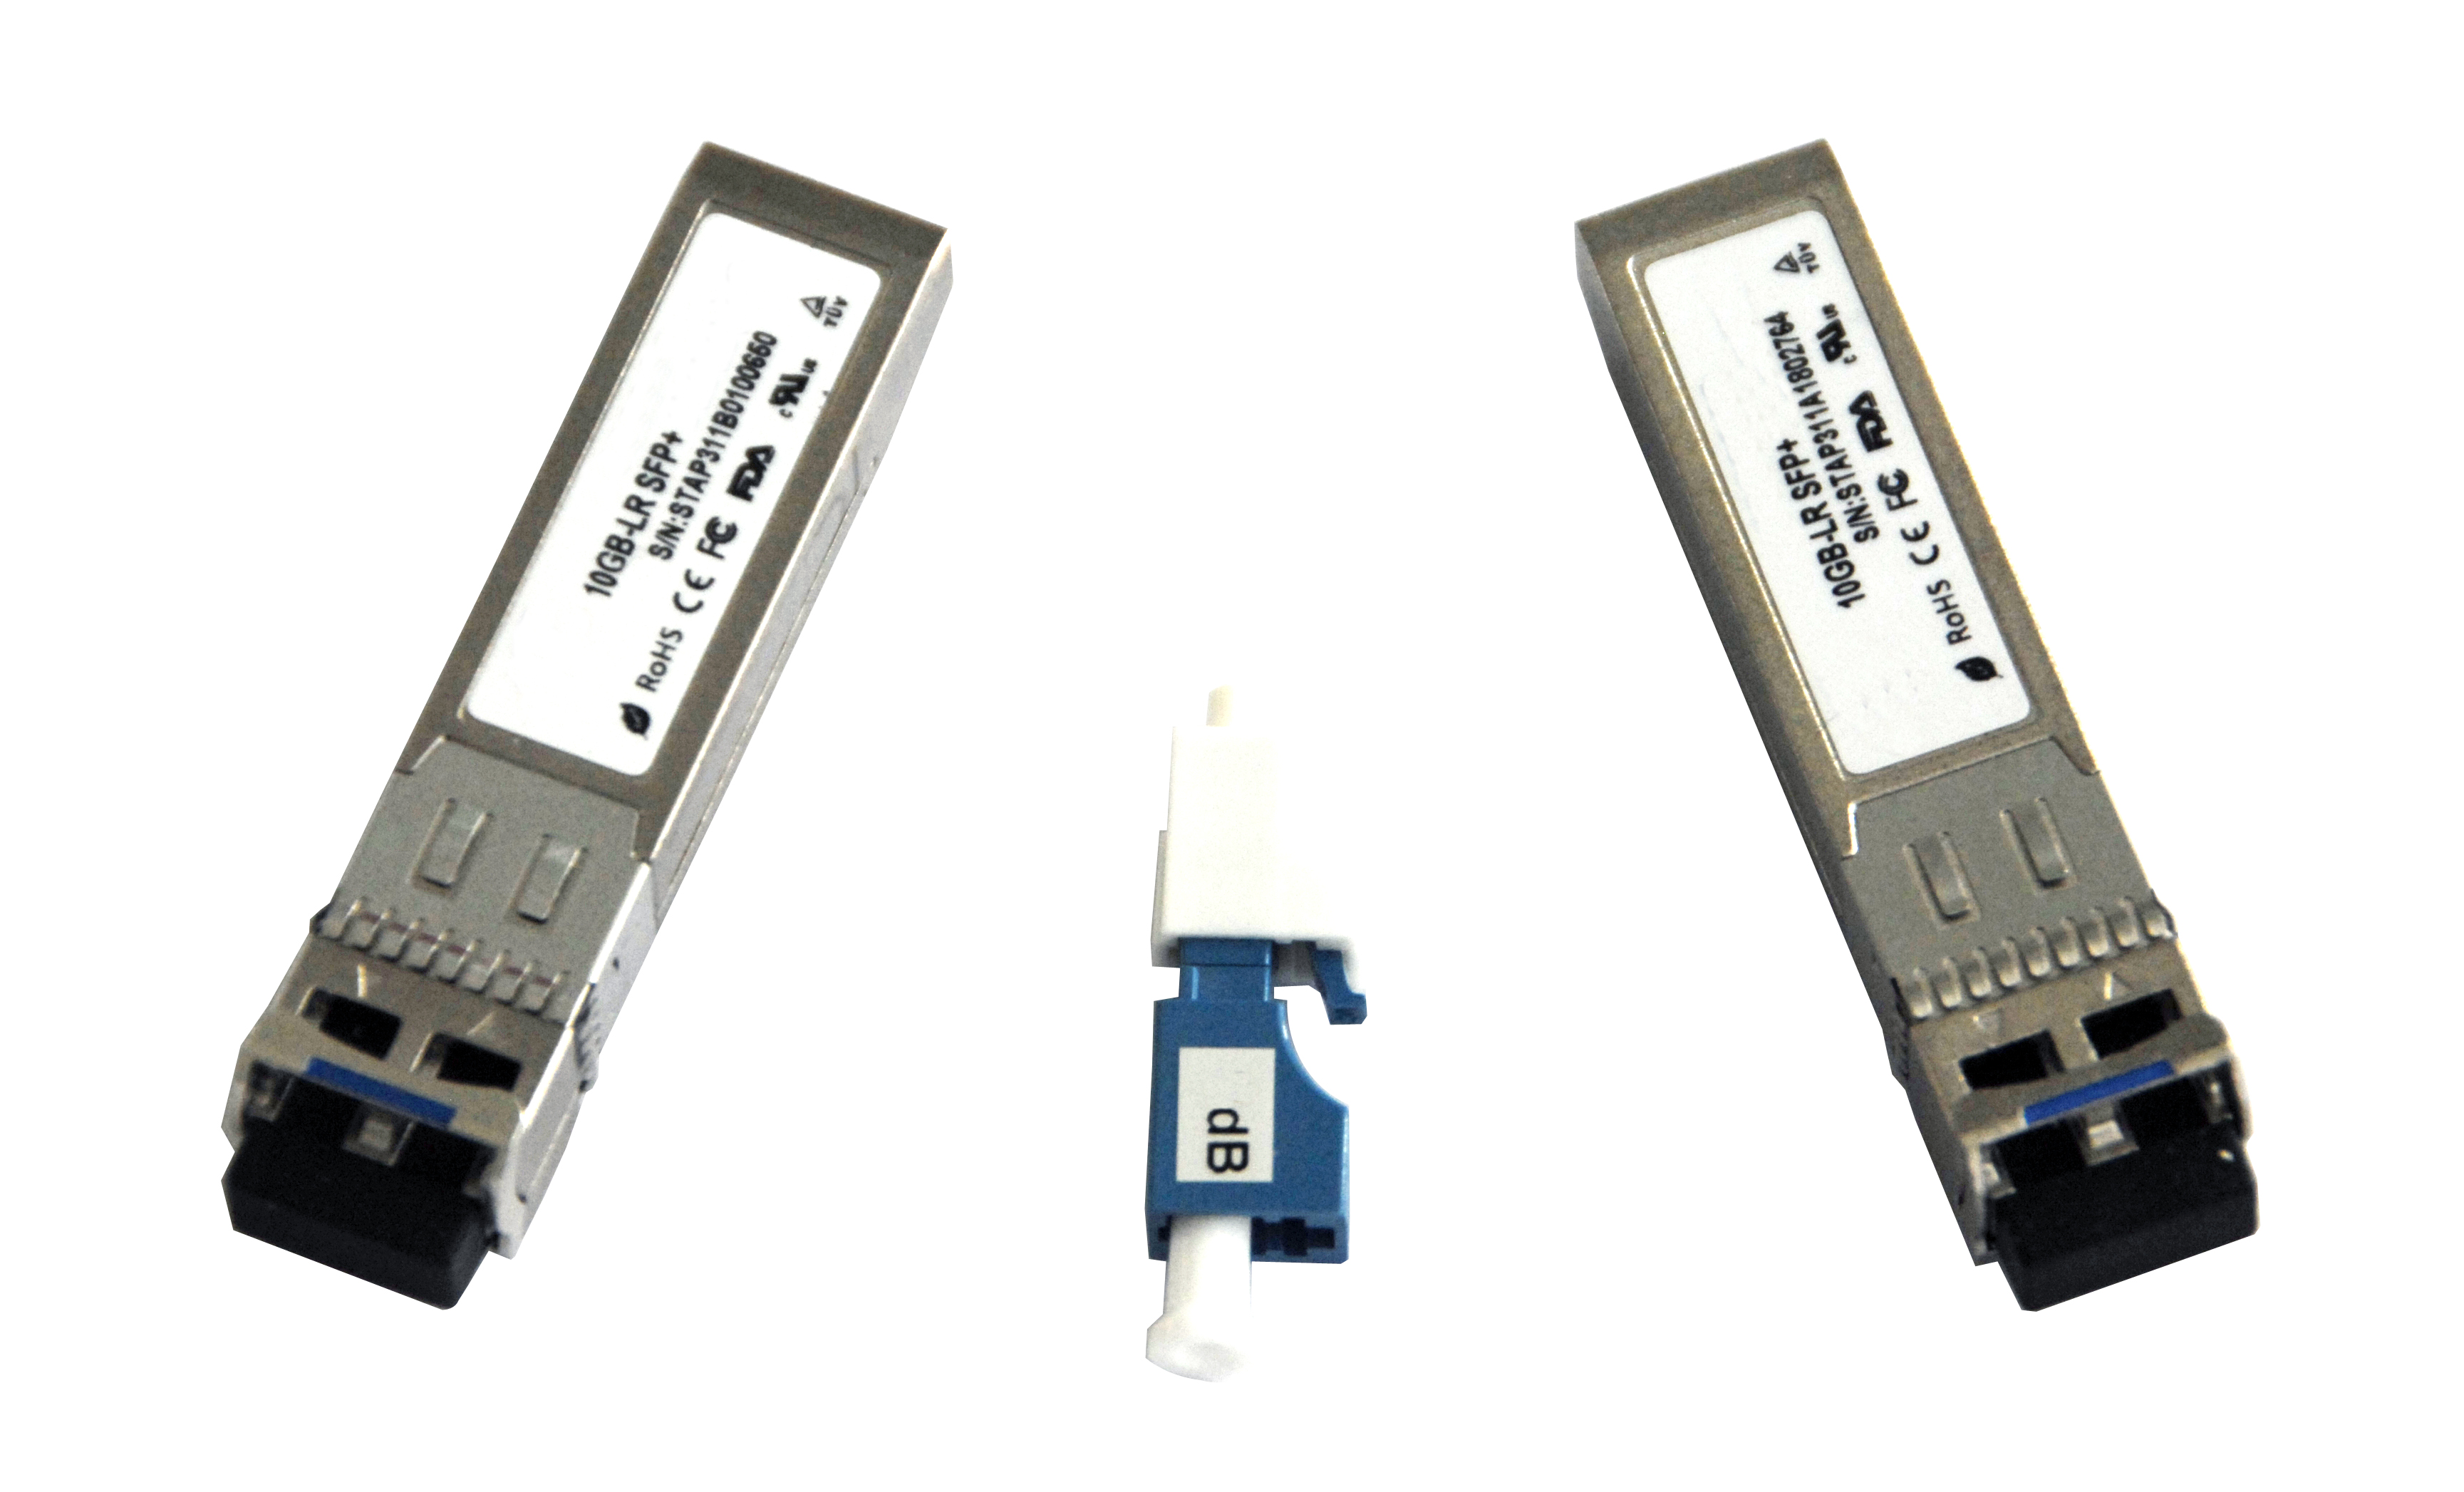 A7846857 | SFP+-Kit (2 EA) with Optical Attenuator, up to 40 km 